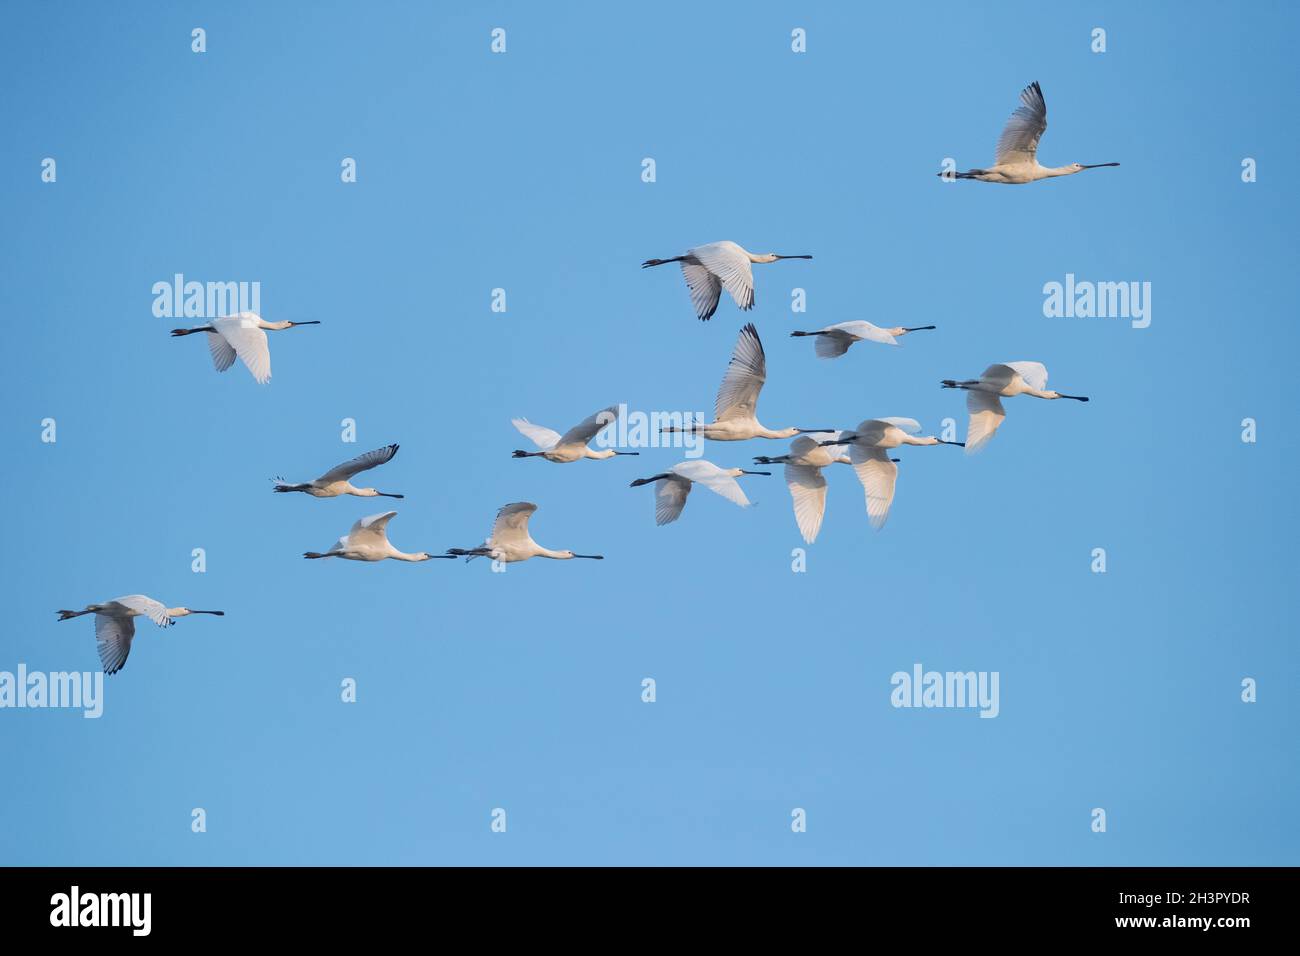 Flock of white spoonbills fly in the blue sky Stock Photo